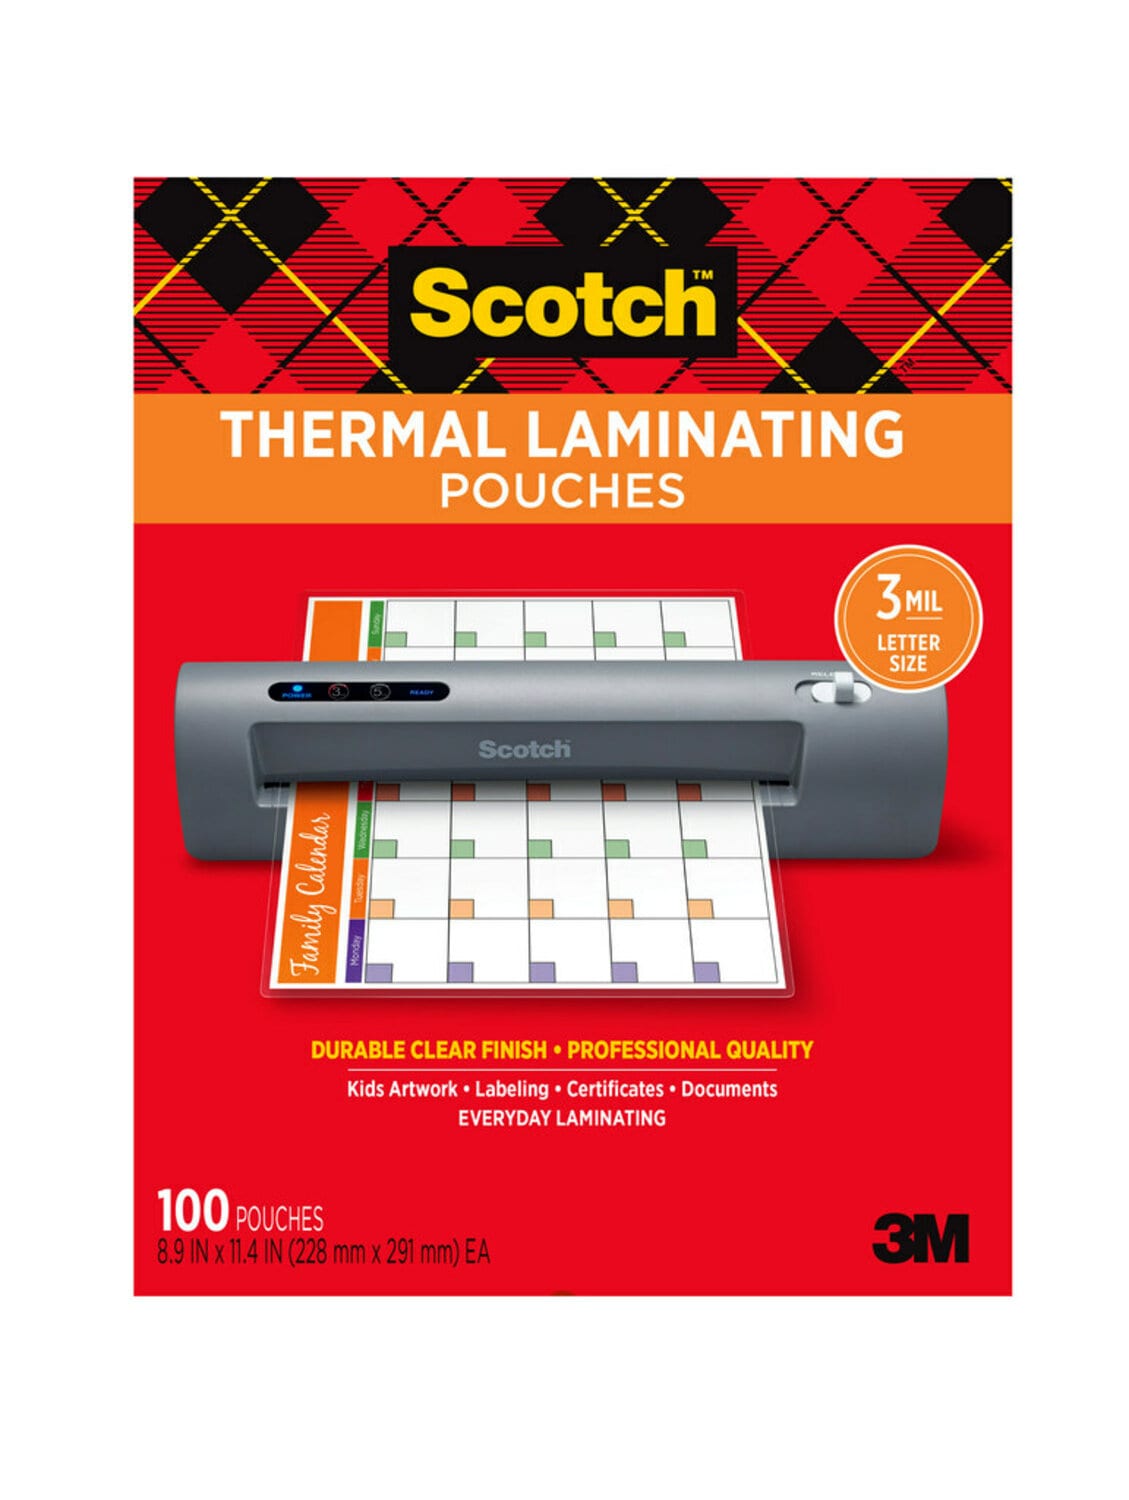 7100231061 - Scotch Thermal Pouches TP3854-100, 8.9 in x 11.4 in (228 mm x 291 mm), 6/shipper